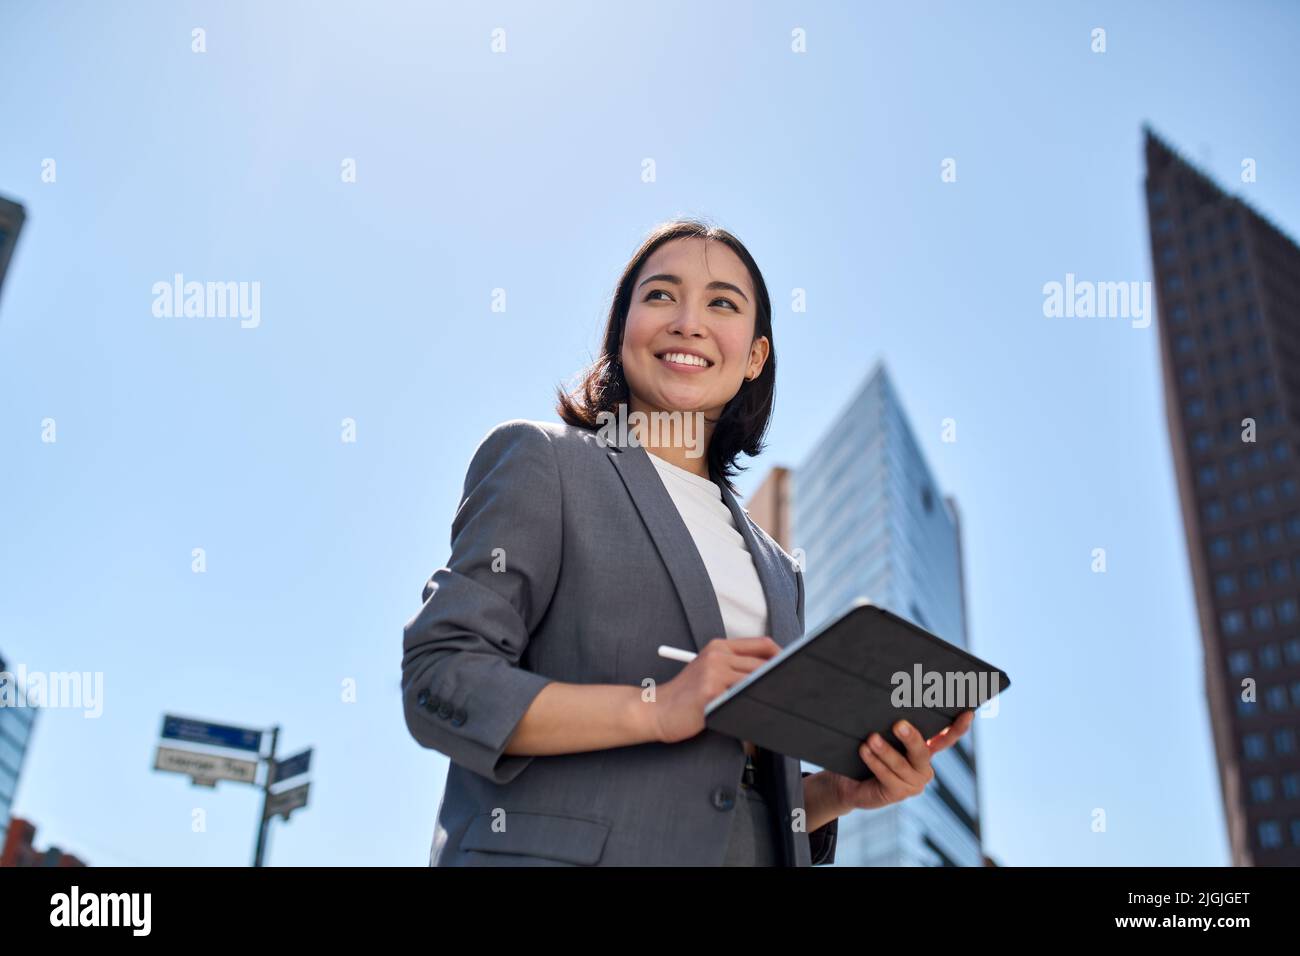 Smiling young Asian businesswoman using digital tablet on city street. Stock Photo